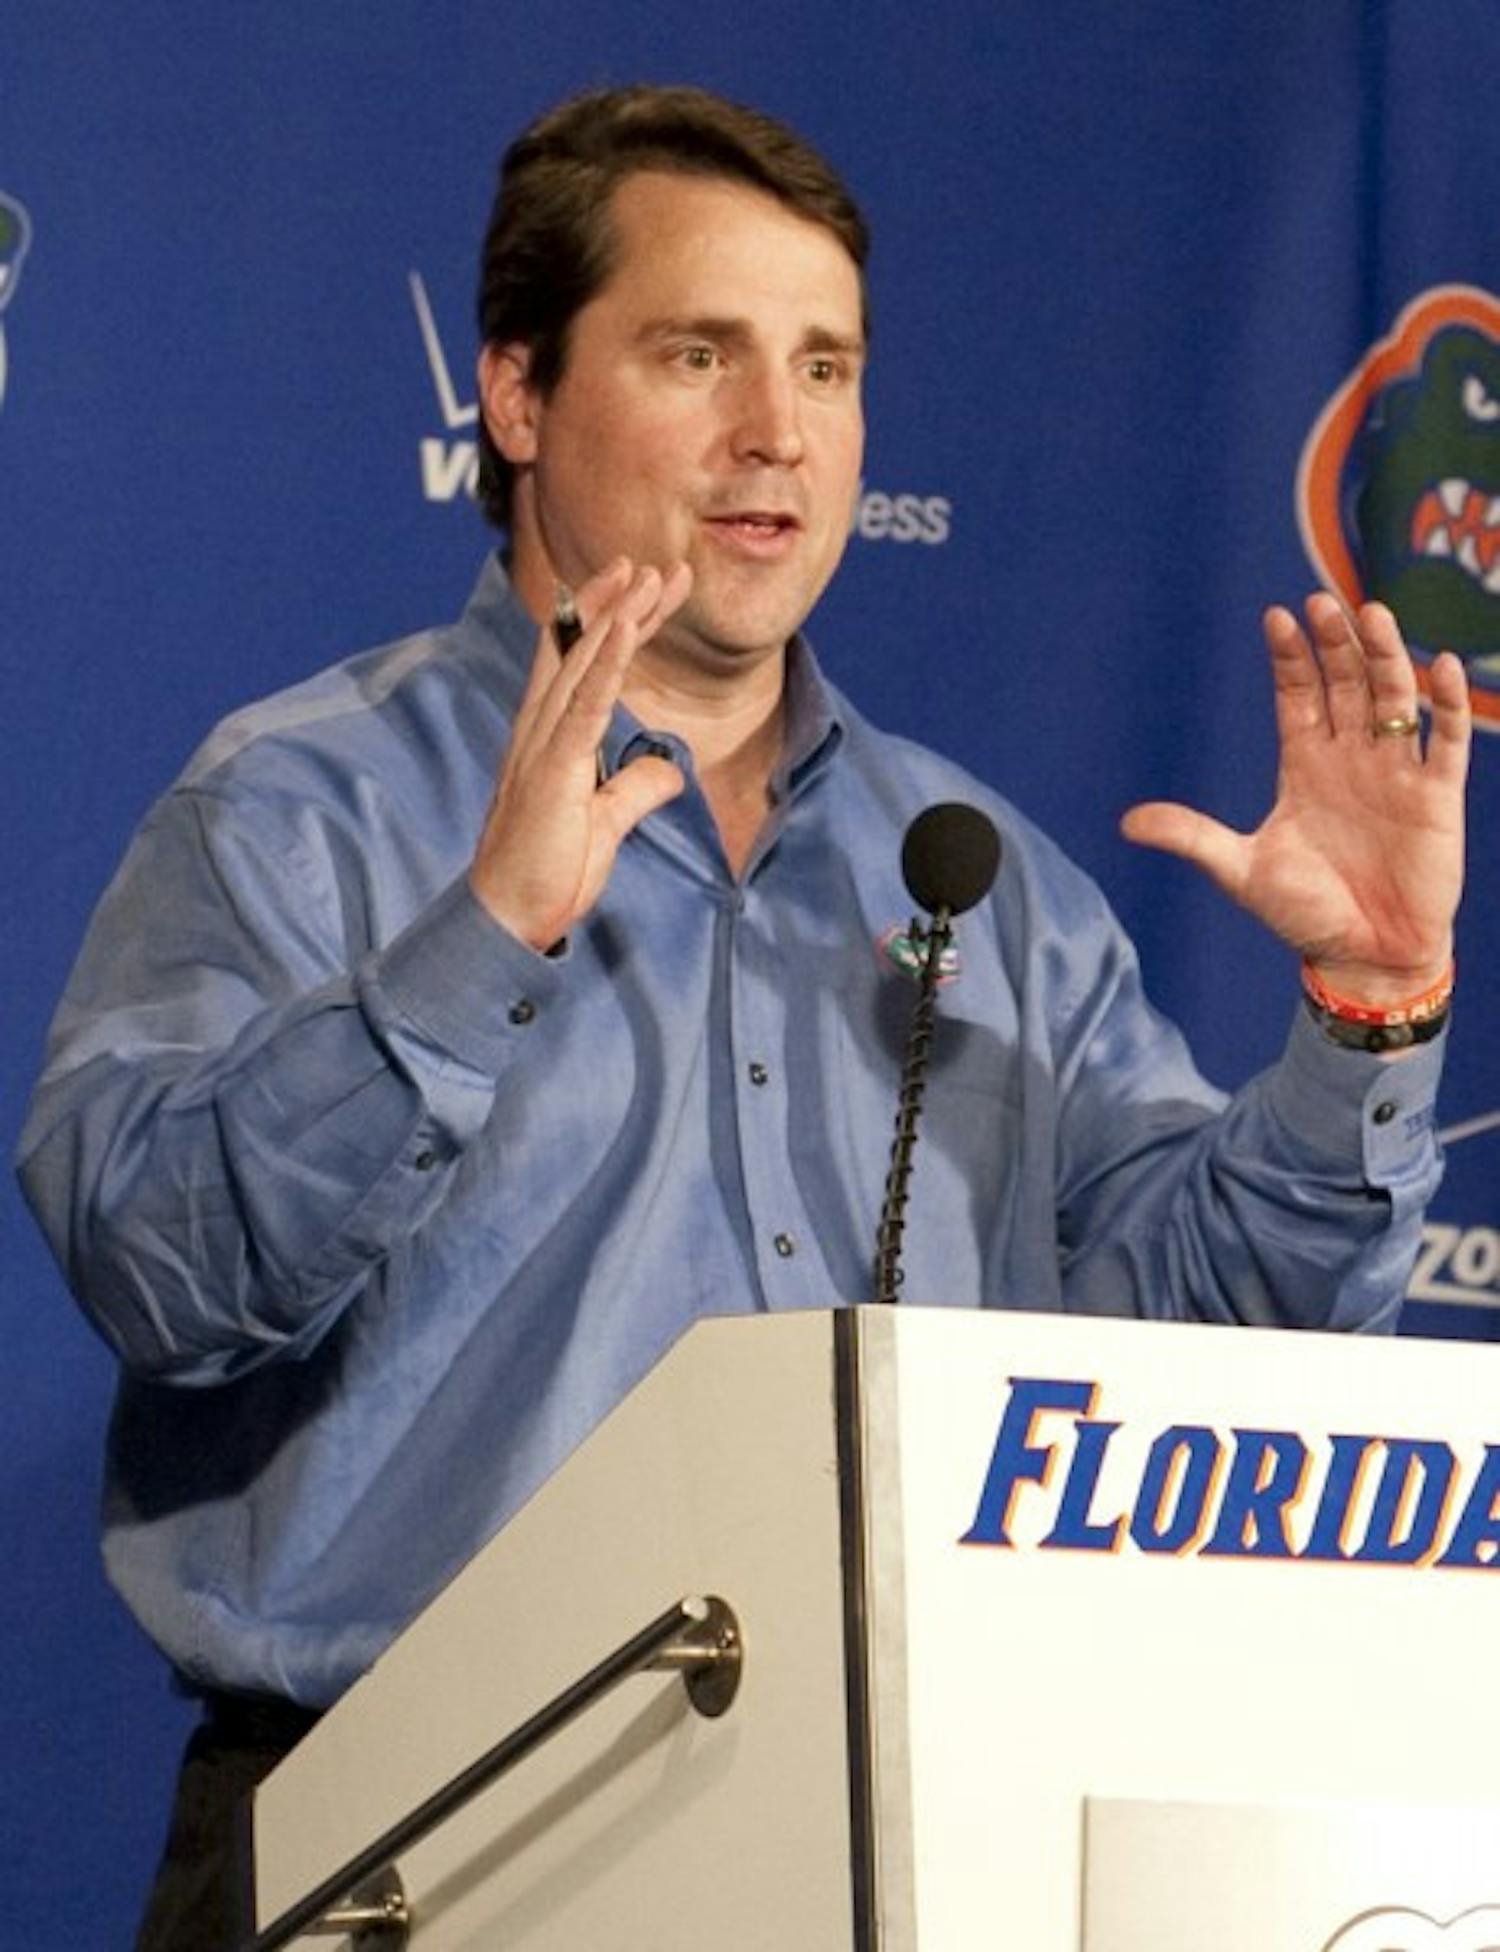 Florida hauled in 23 commitments in coach Will Muschamp’s first full recruiting class, including 14 players who play on the line of scrimmage.